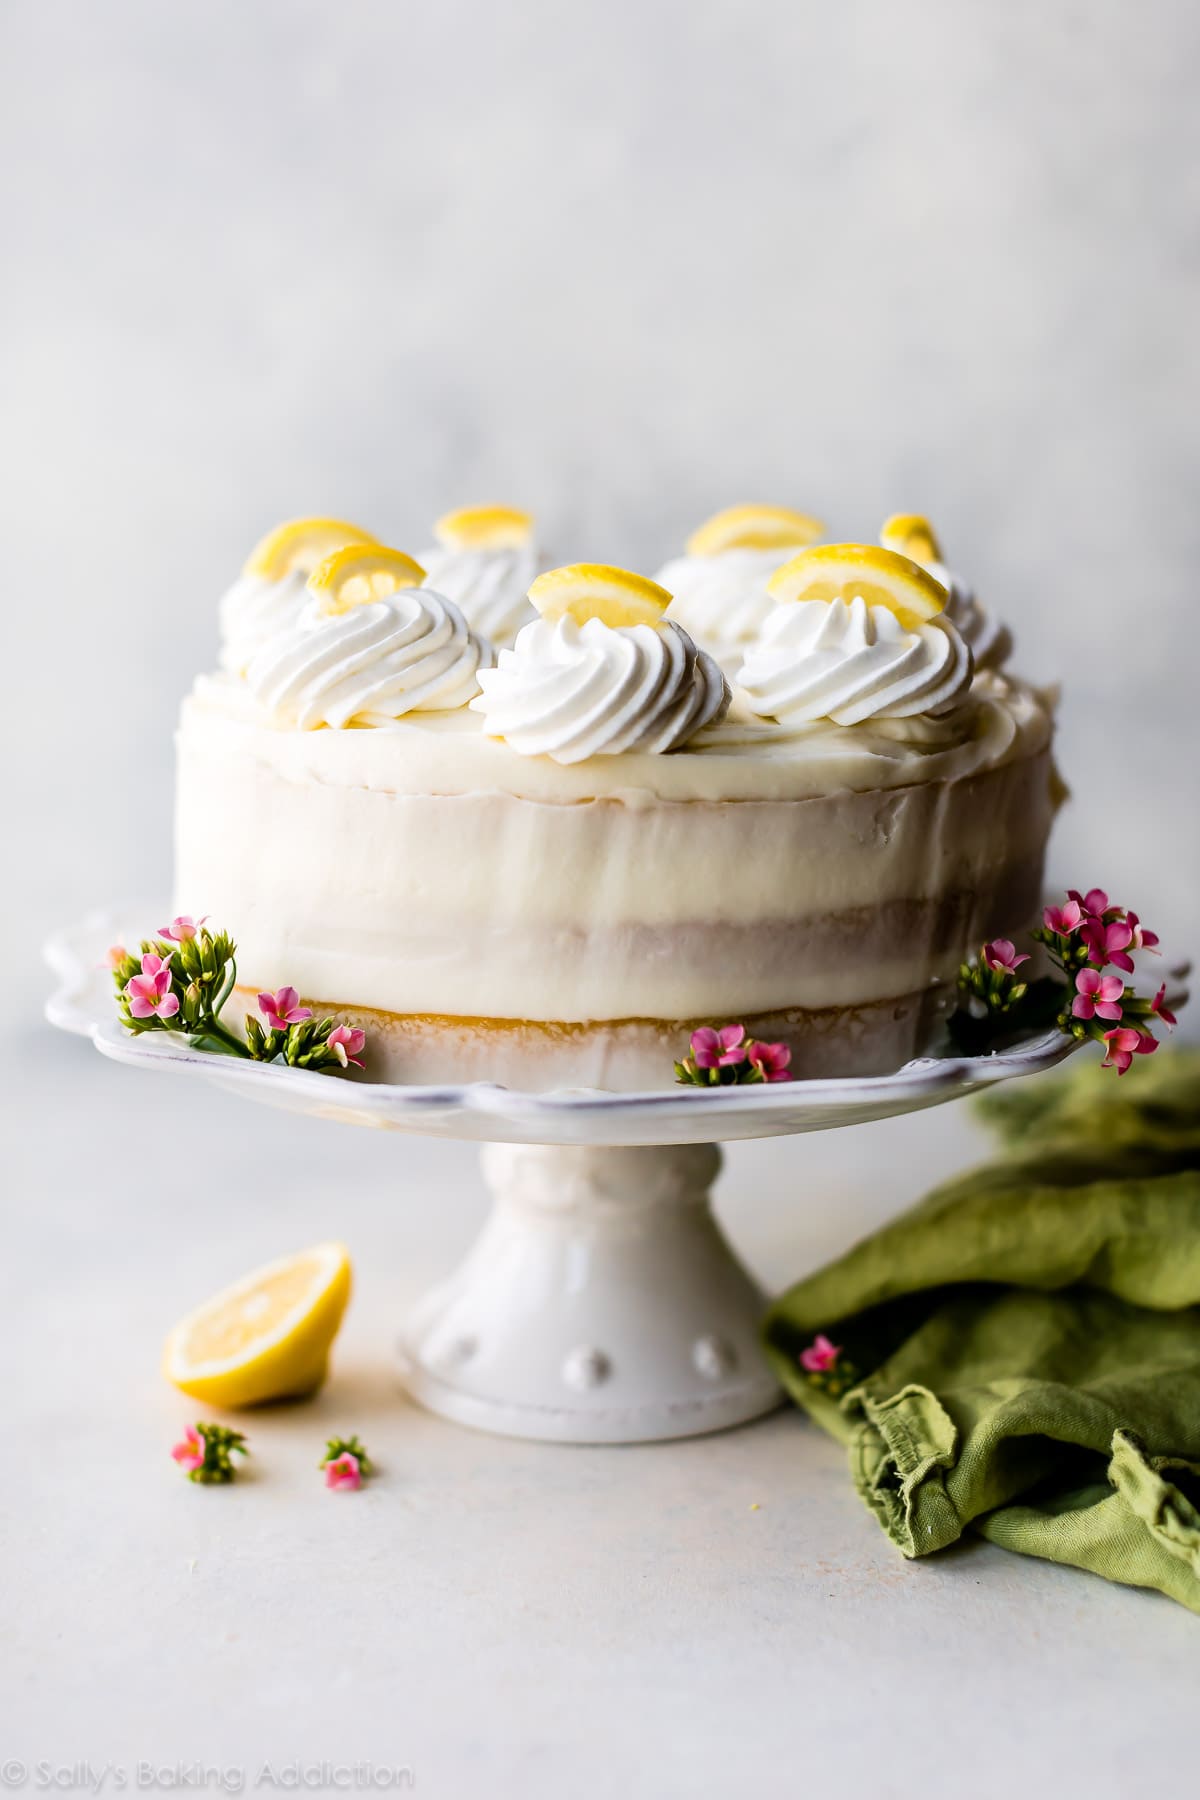 A layered lemon cake on a cake stand topped with a thin icing, and swirls of whipped cream and lemon slices.